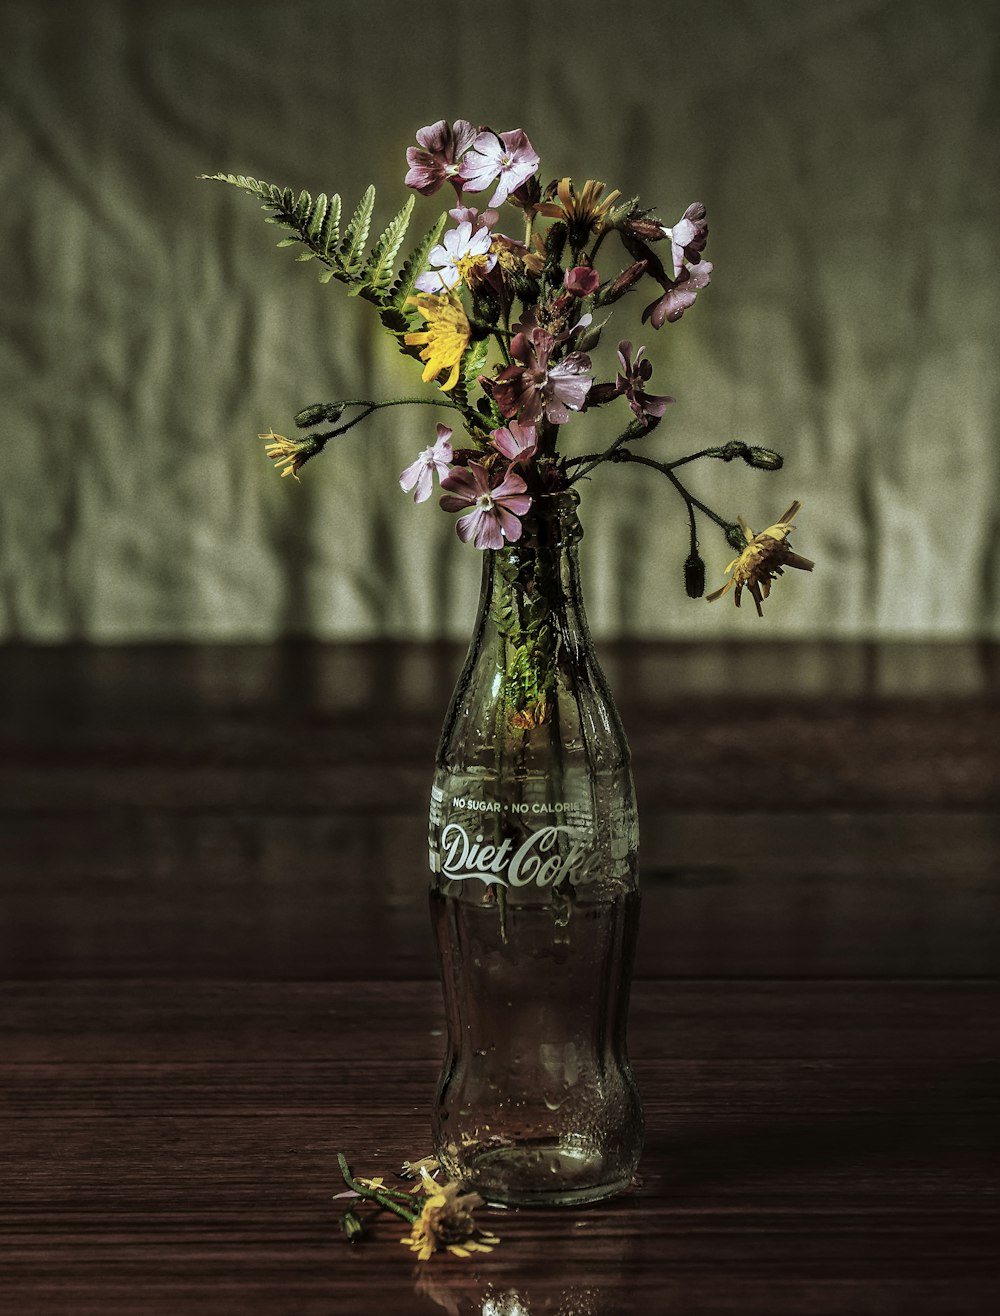 purple and white flowers in clear glass vase